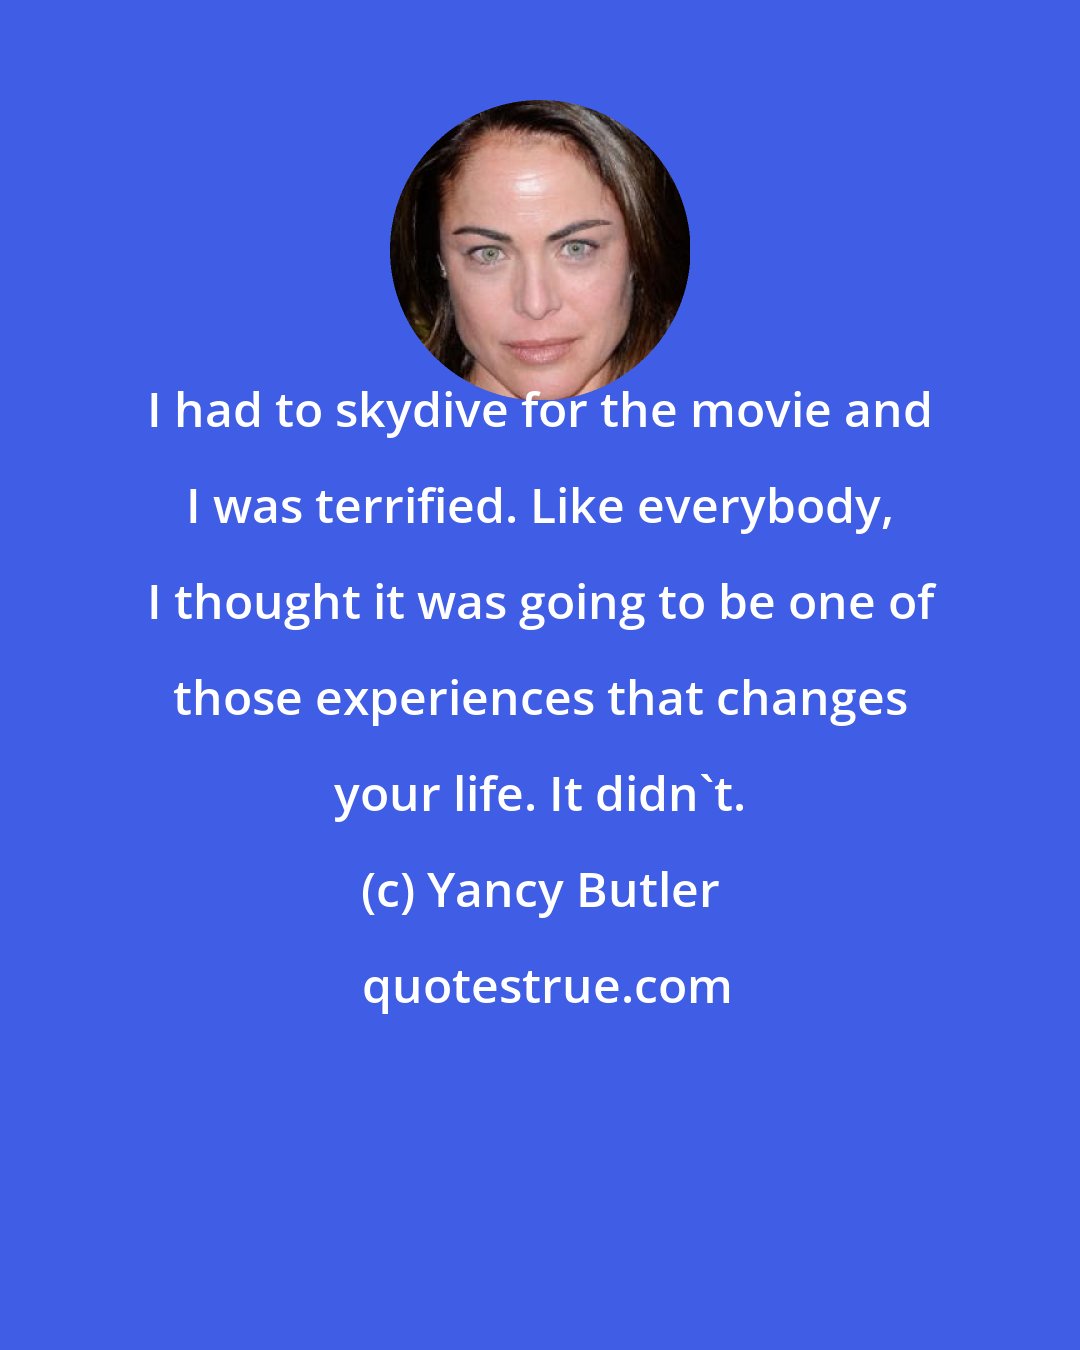 Yancy Butler: I had to skydive for the movie and I was terrified. Like everybody, I thought it was going to be one of those experiences that changes your life. It didn't.